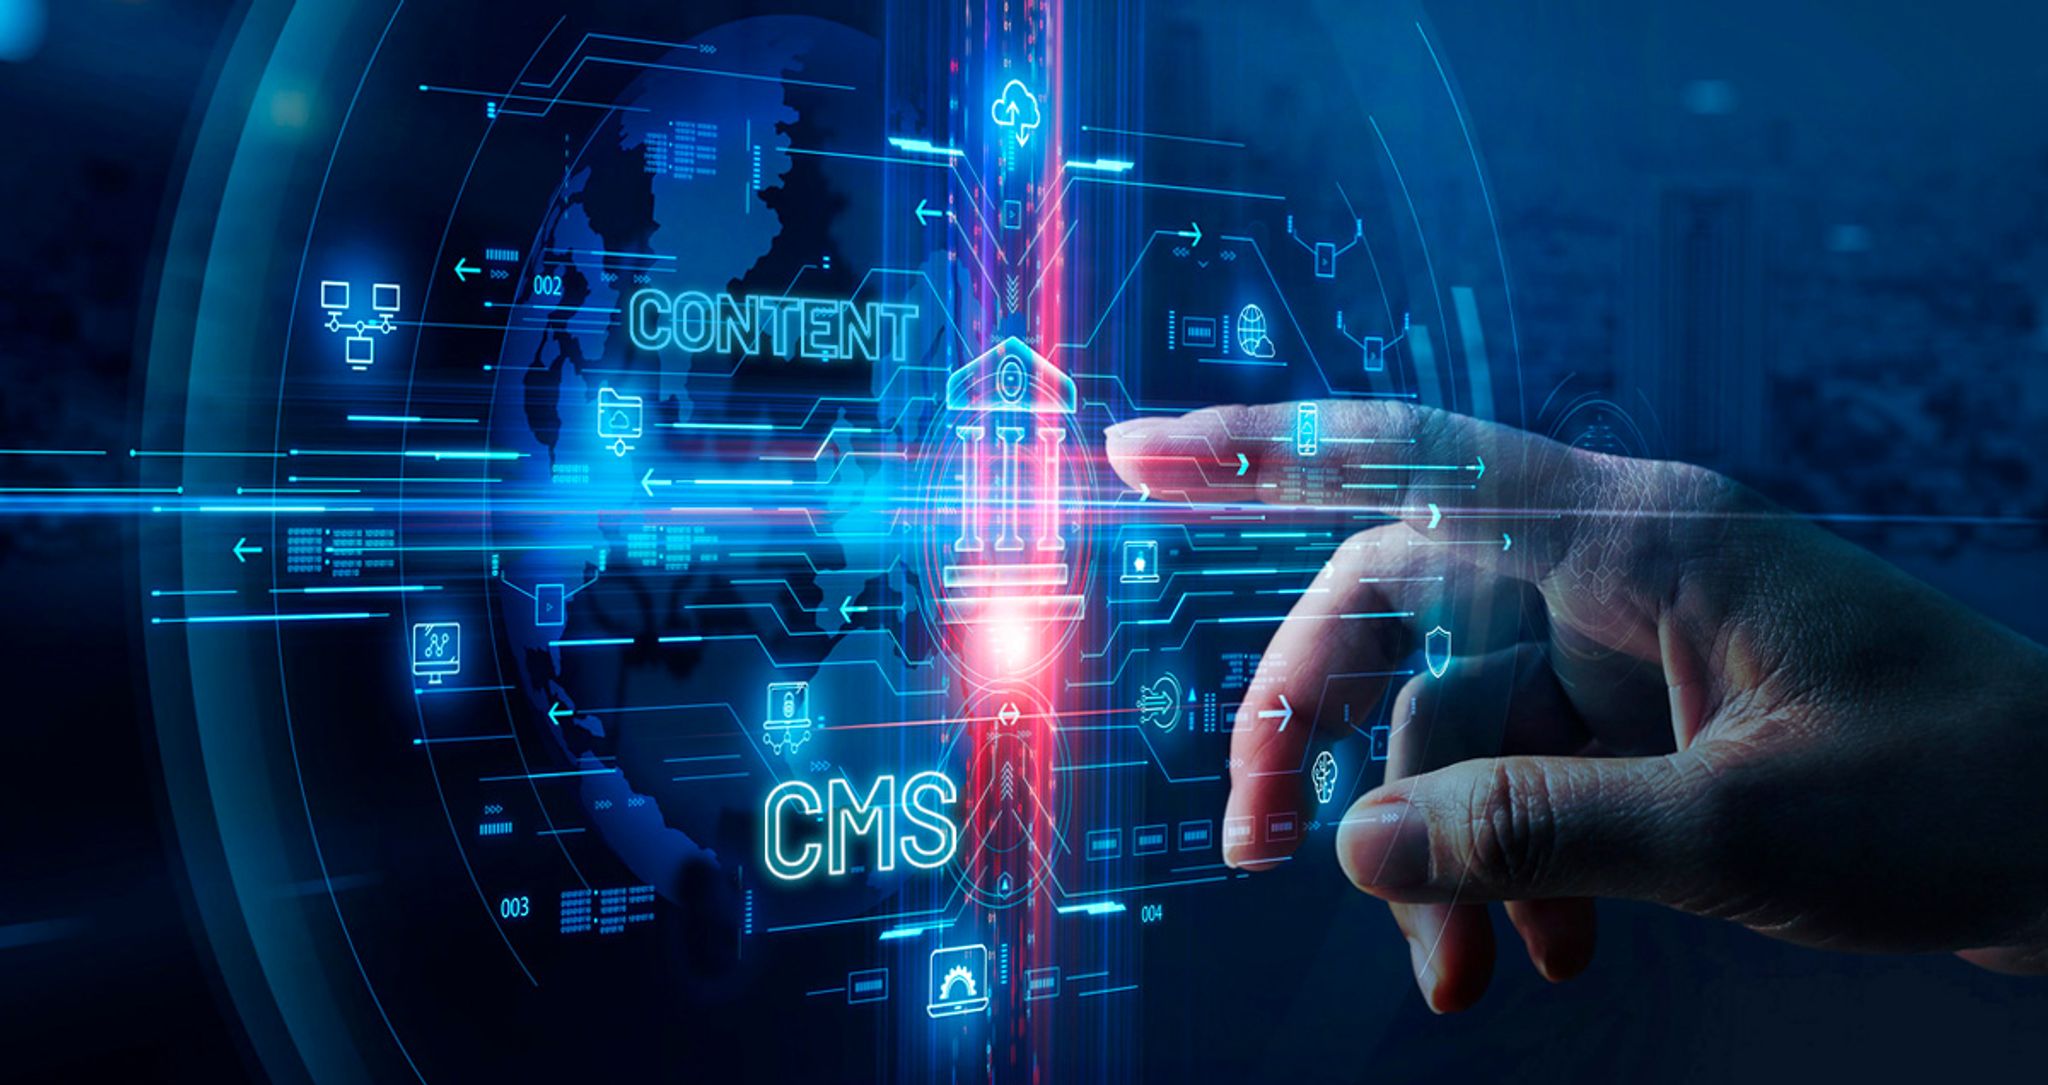 Hand touching virtual hologram of banking and financial technology services, with the words "CMS" and "content floating in the composite imagery.